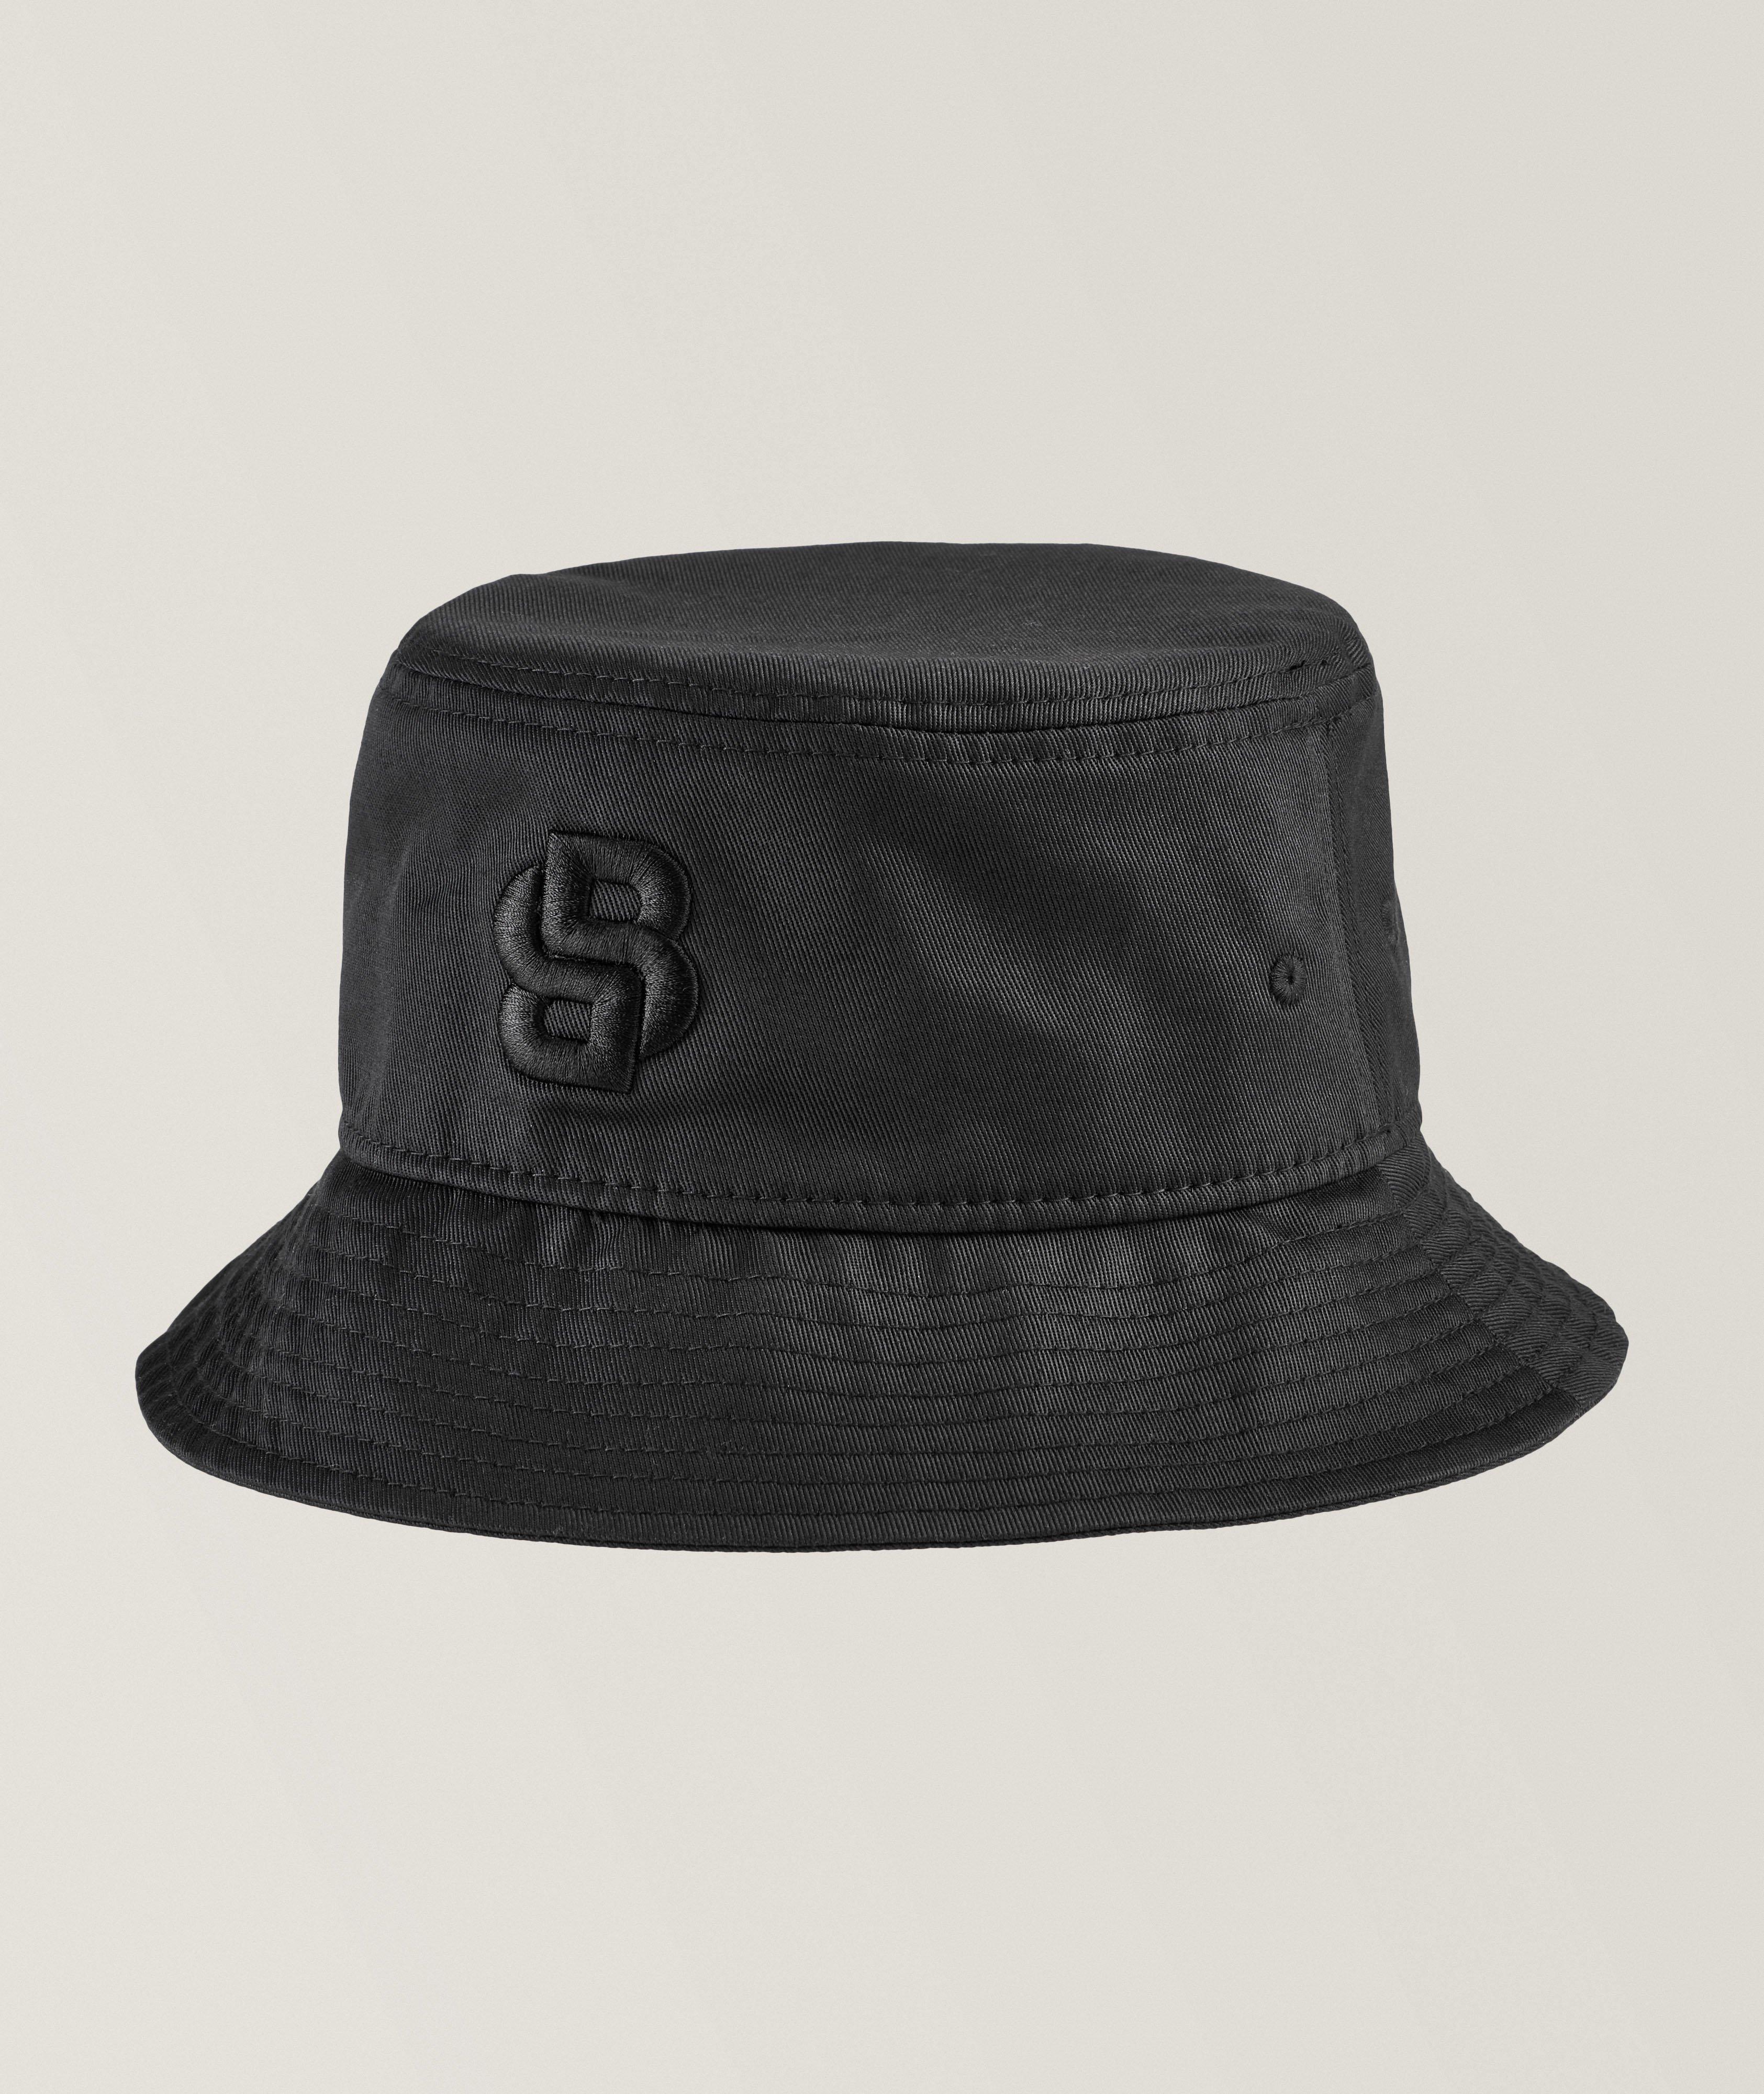 BOSS Saul B Iconic Cotton Bucket Hat in Black | Size Large